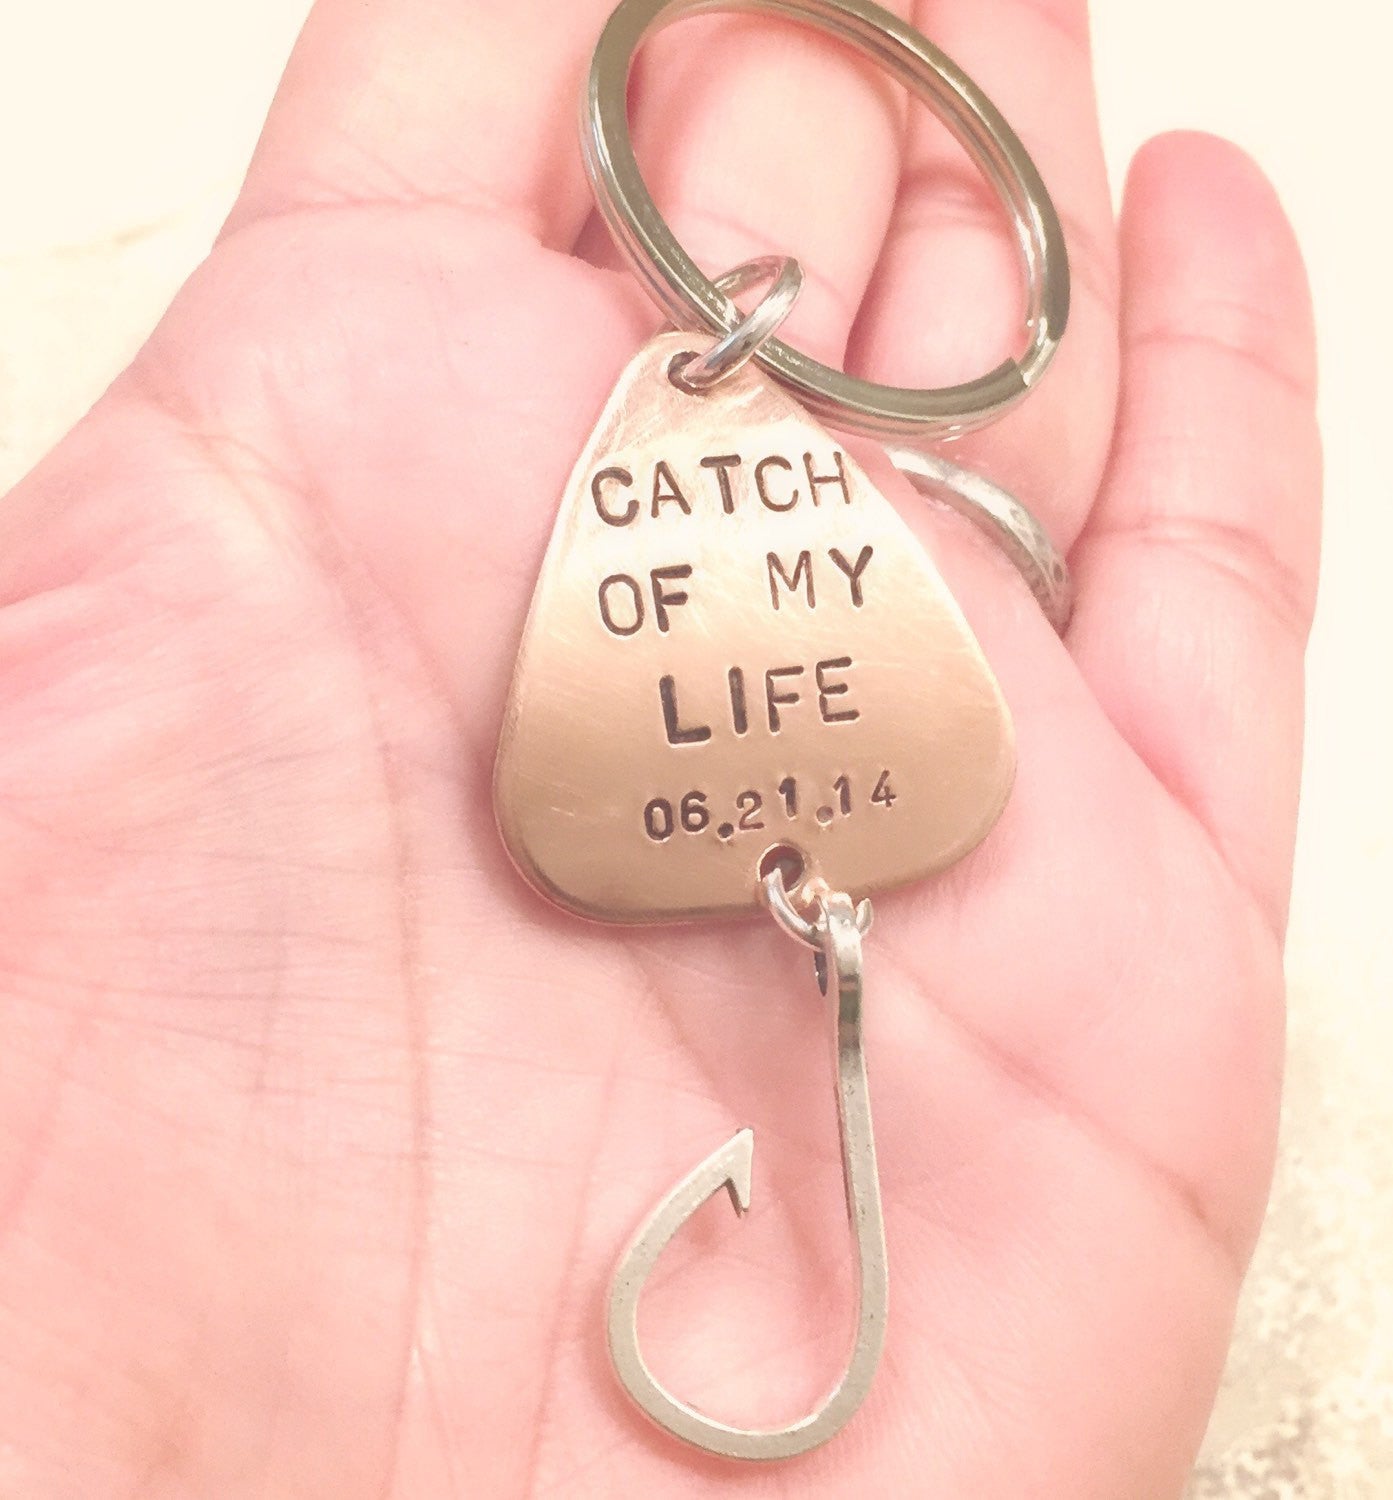 Fishing Keychain, Fathers Day Gifts, for Him, Boyfriend Gift, Personalized Fishing Lure, Hand Stamped Fishing Lure,natashaaloha Stainless Steel / Real